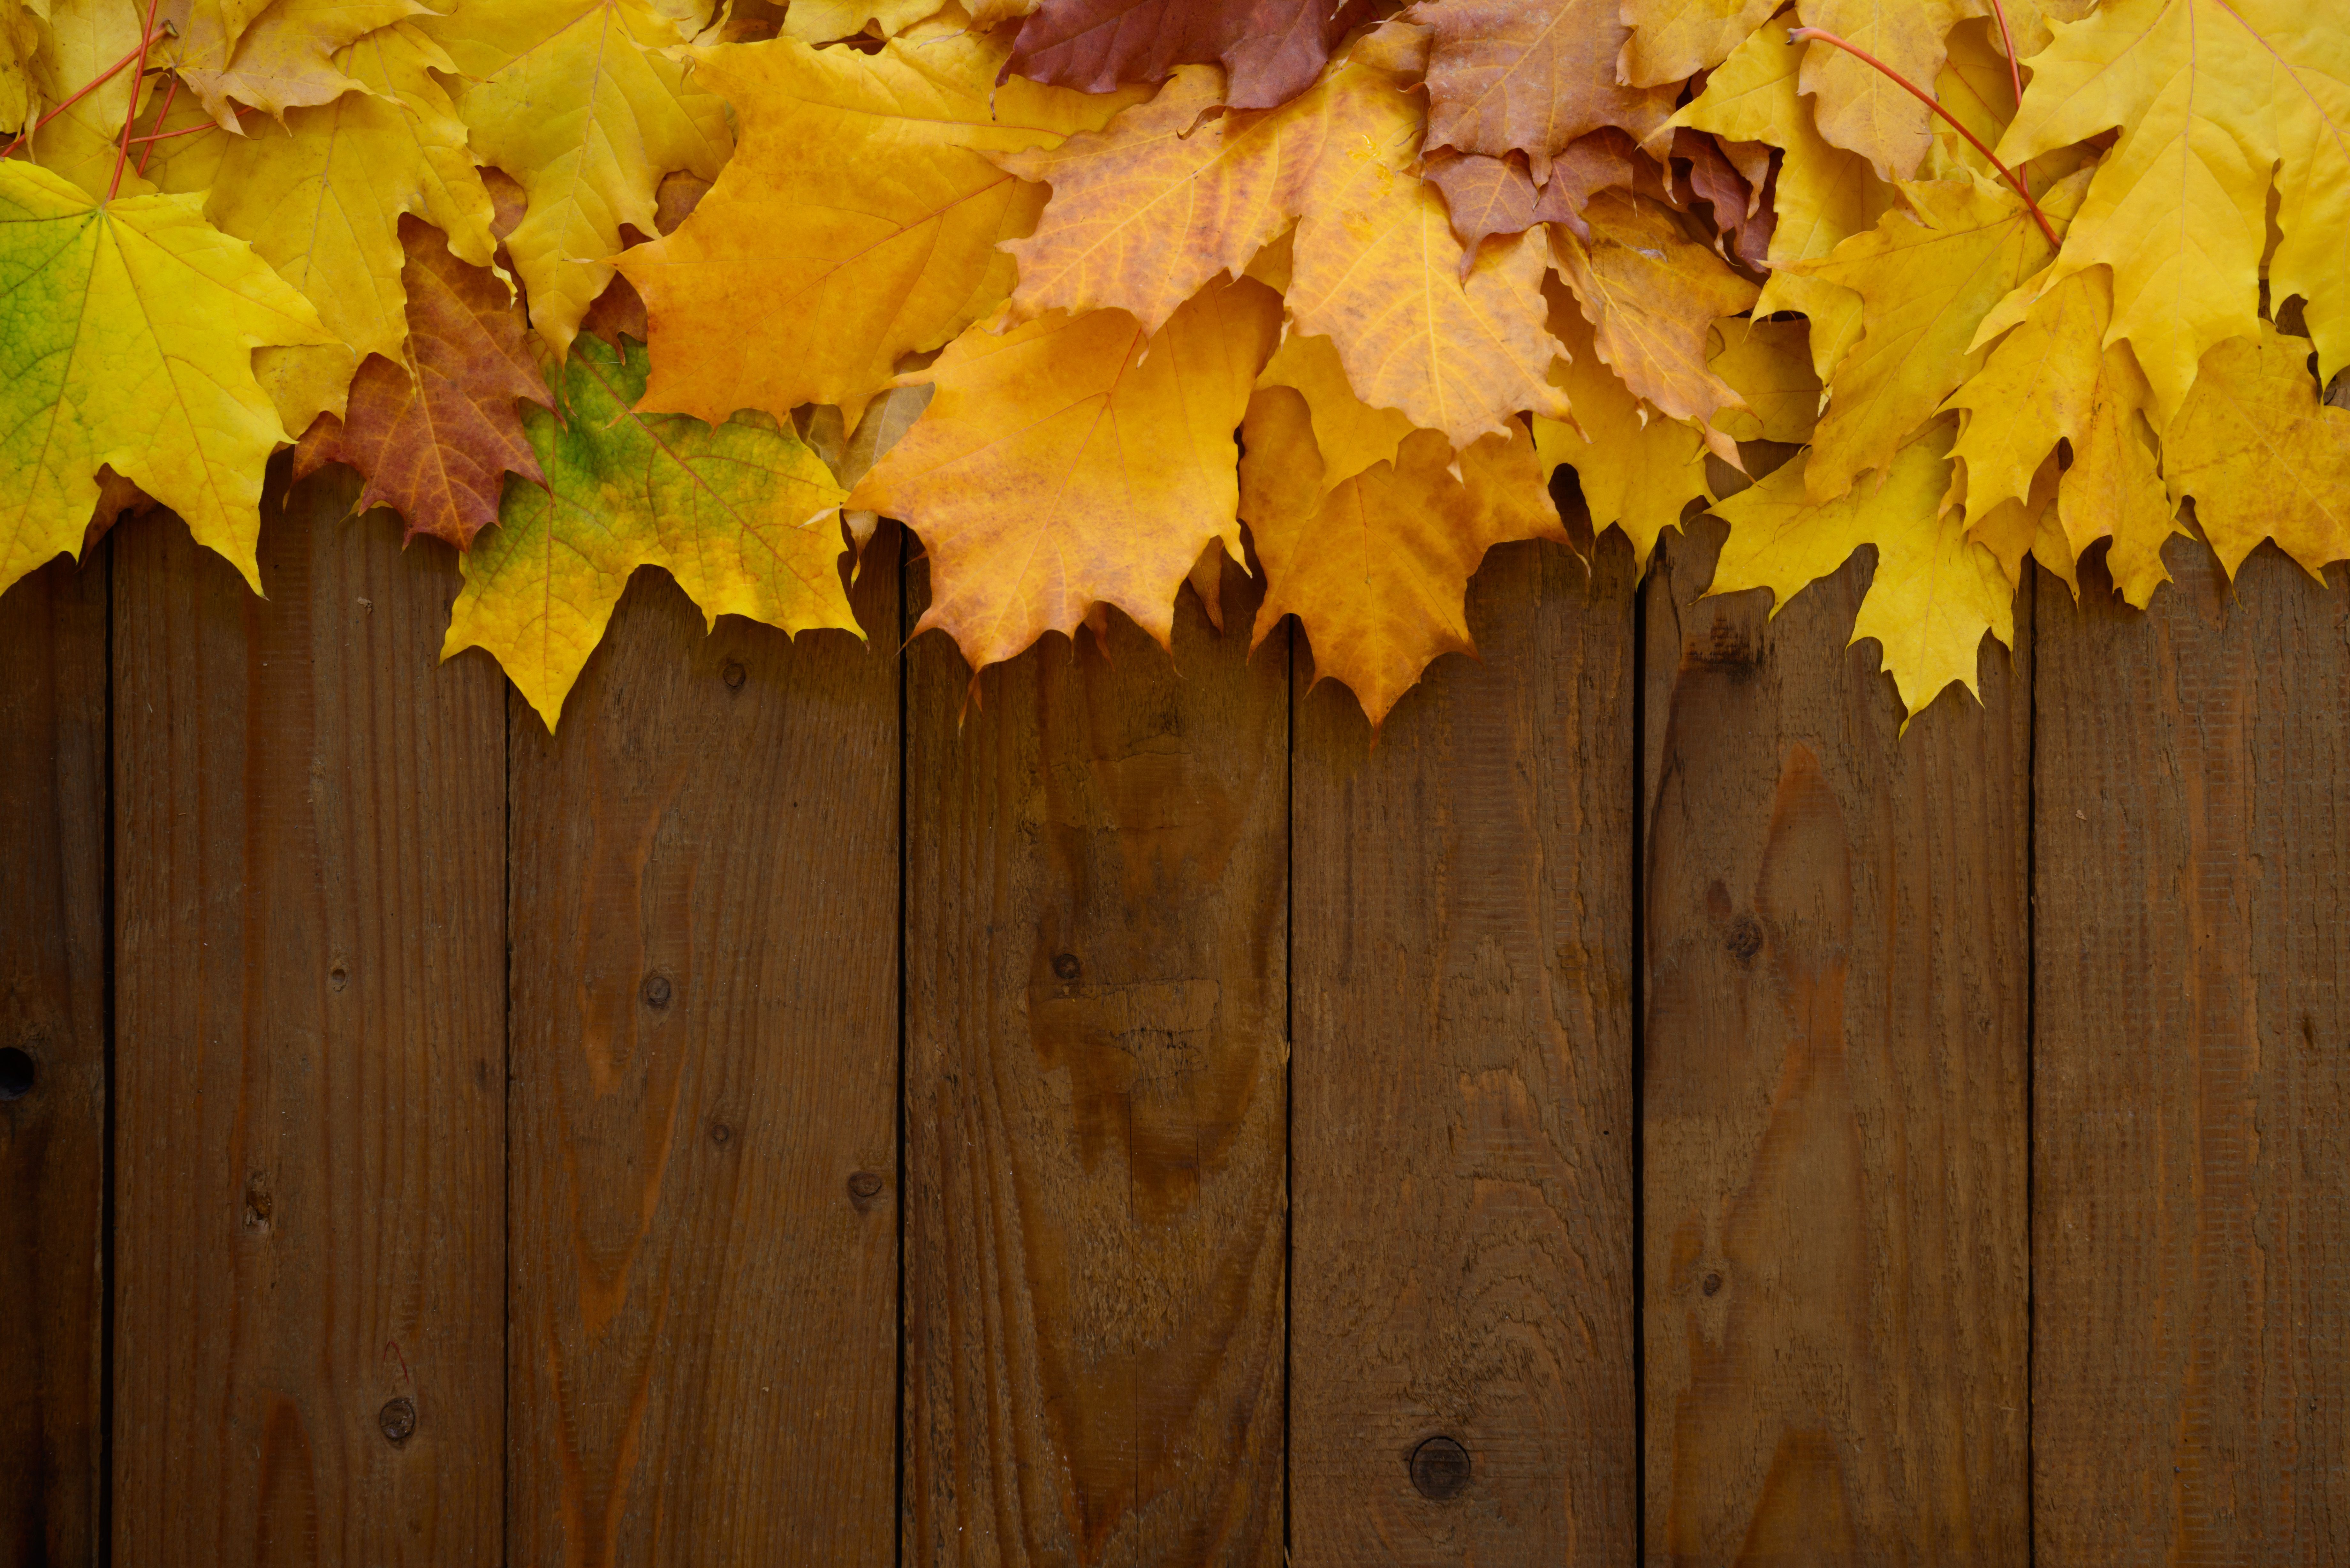 Wooden Background With Autumn Leaves Quality Image And Transparent PNG Free Clipart